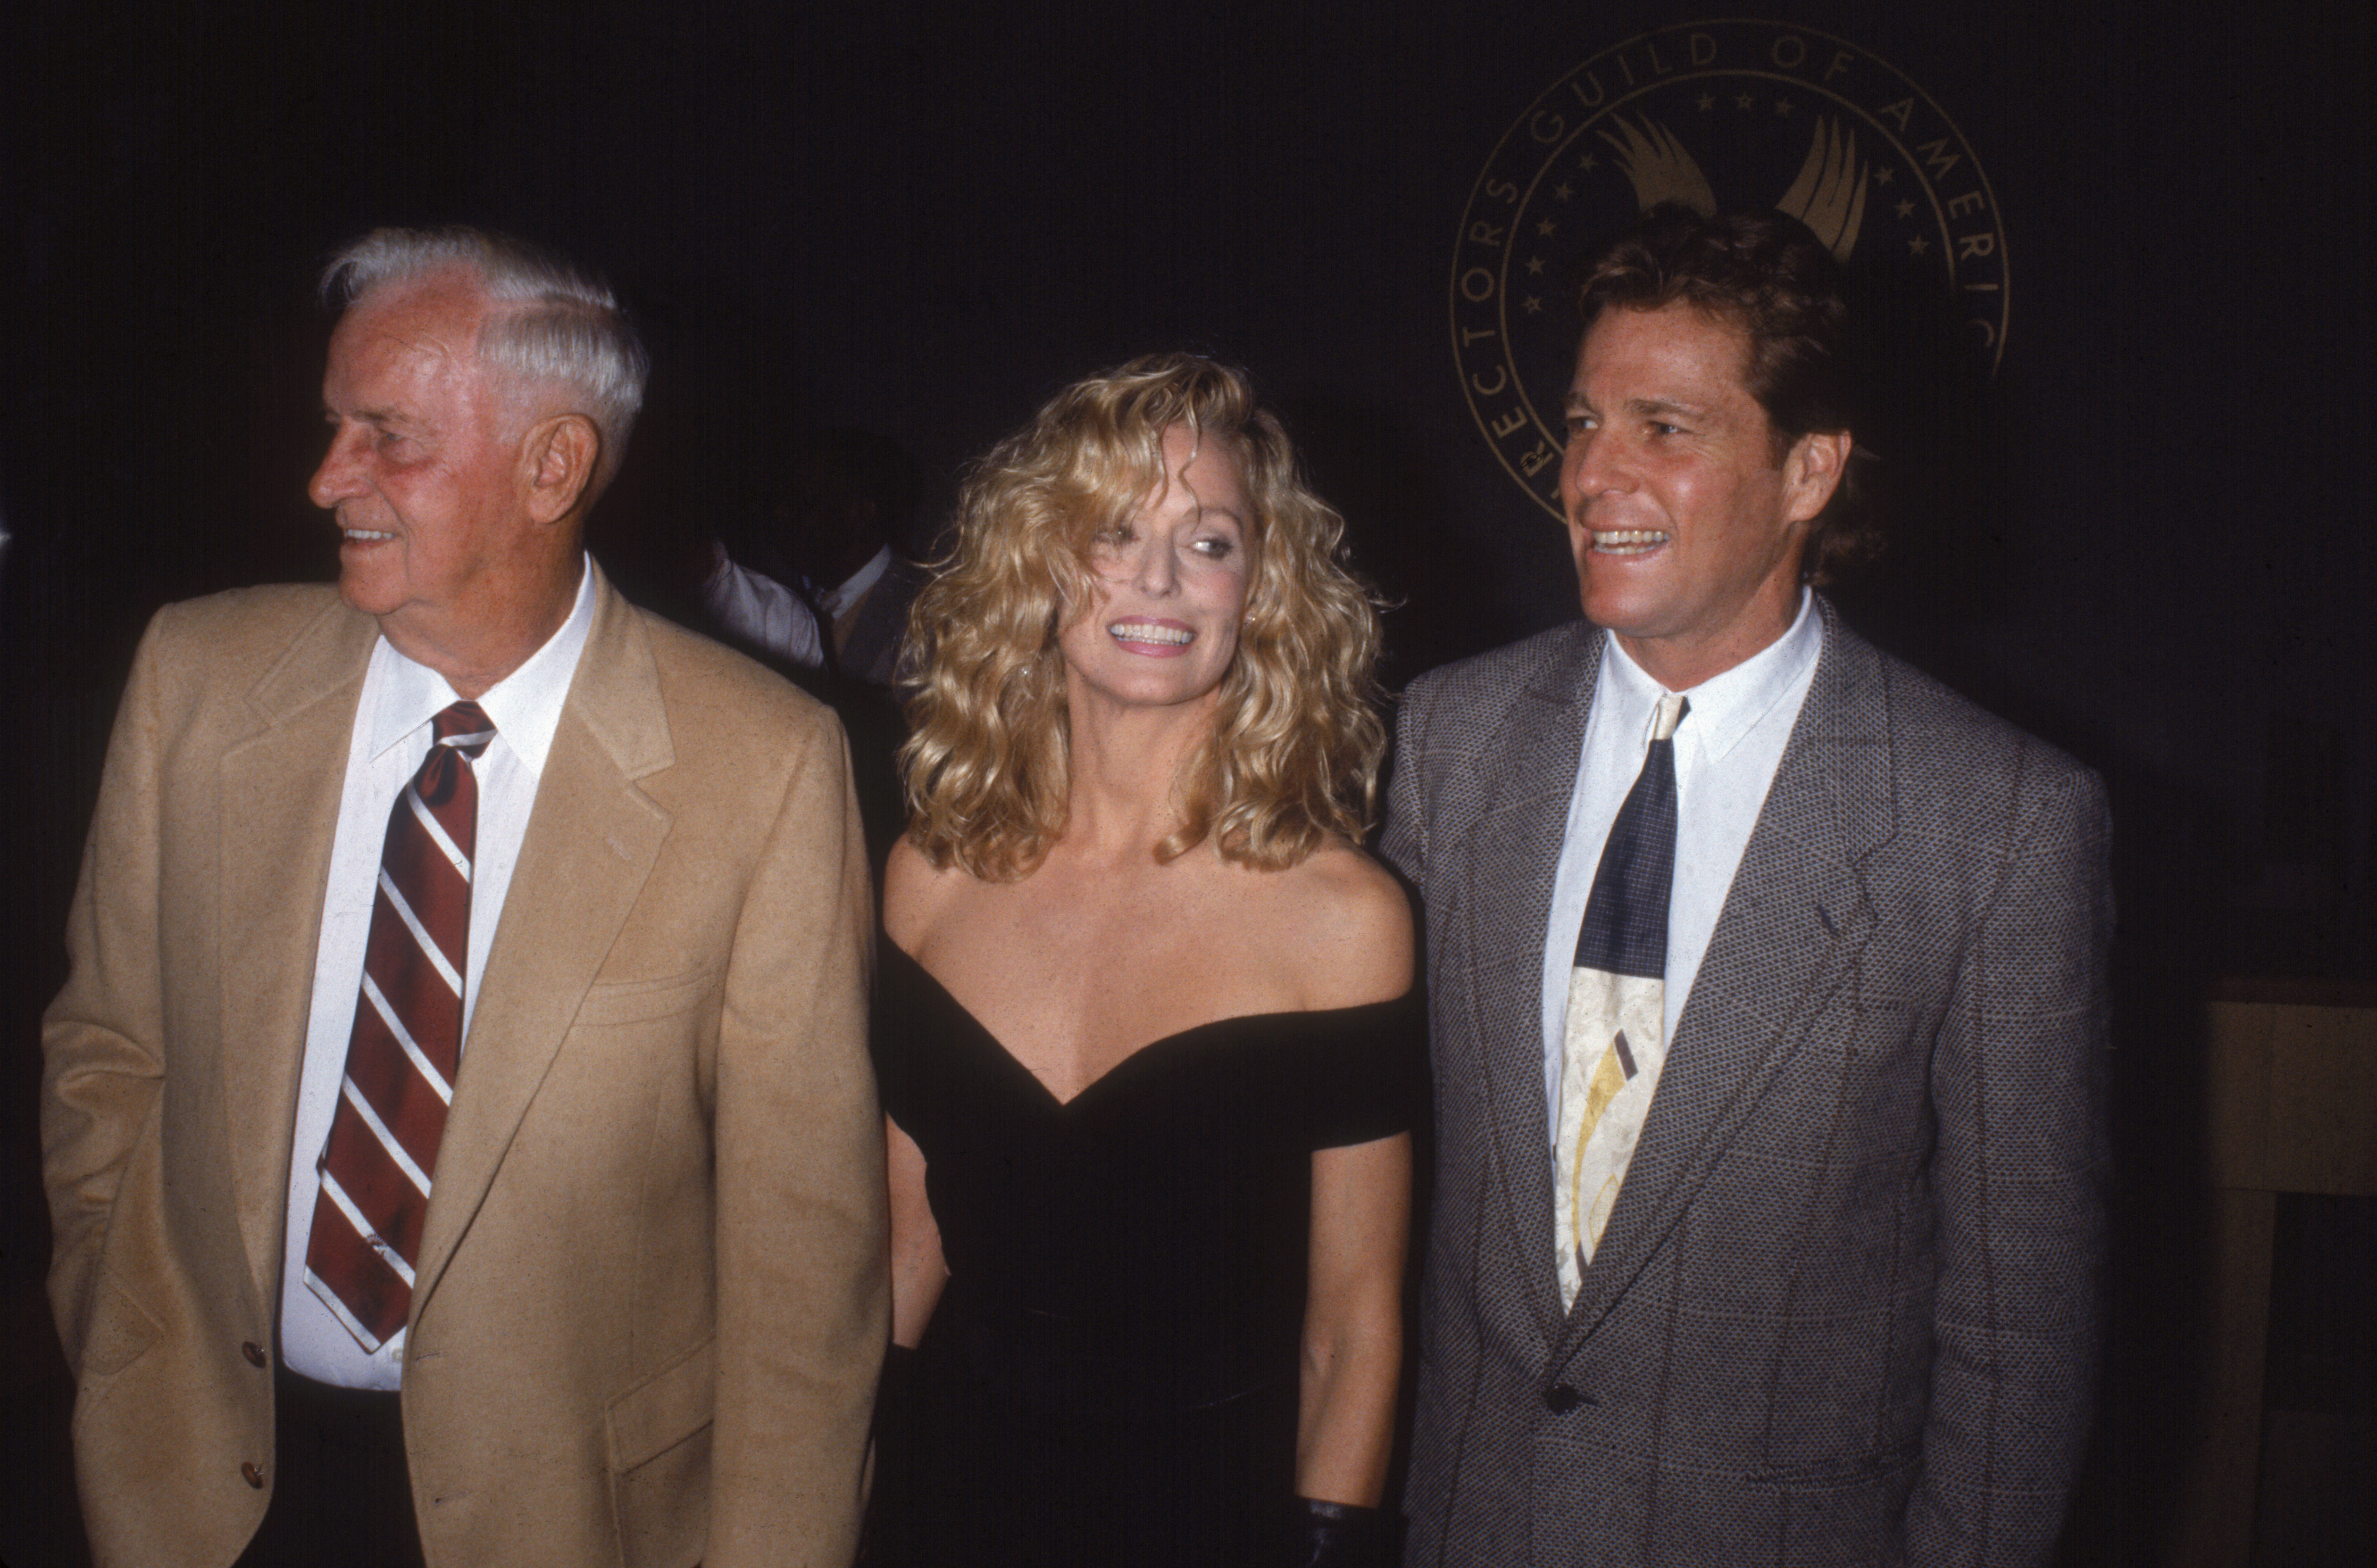 James Fawcett and Farrah Fawcett with Ryan O'Neal at the "Cry Freedom" premiere in Universal City, 1987 | Source: Getty Images